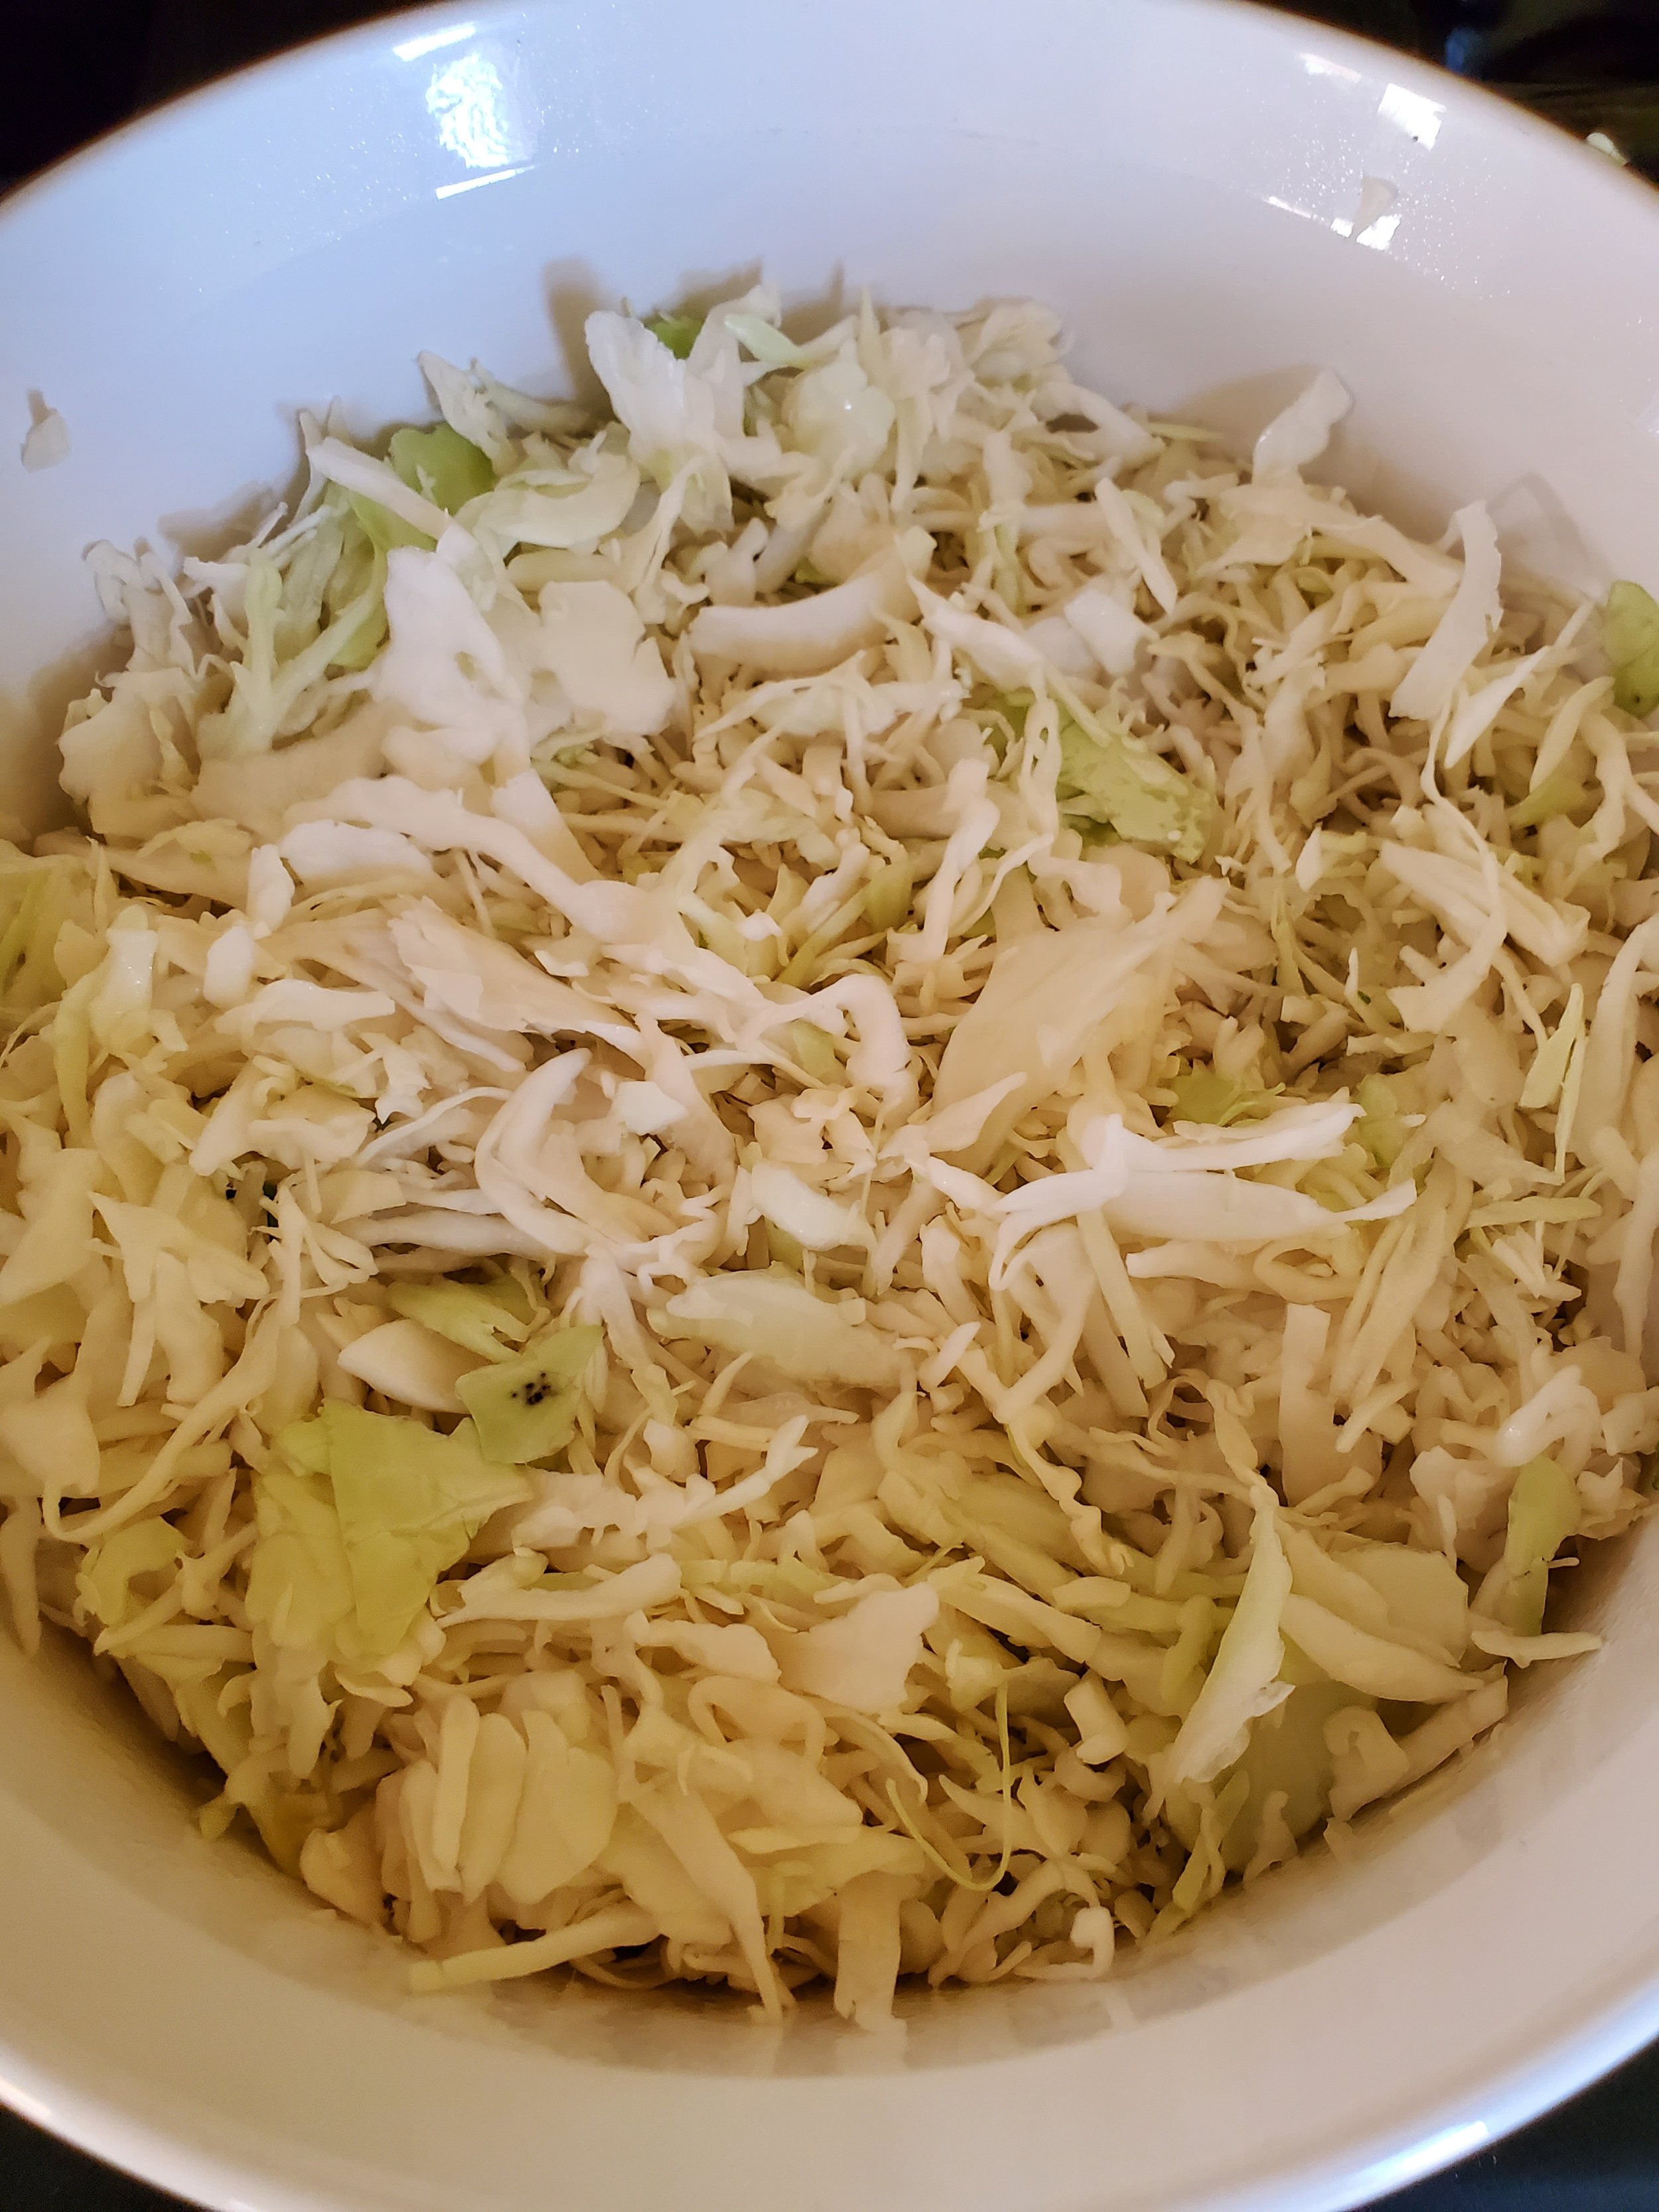 Tightly packed coleslaw for the base